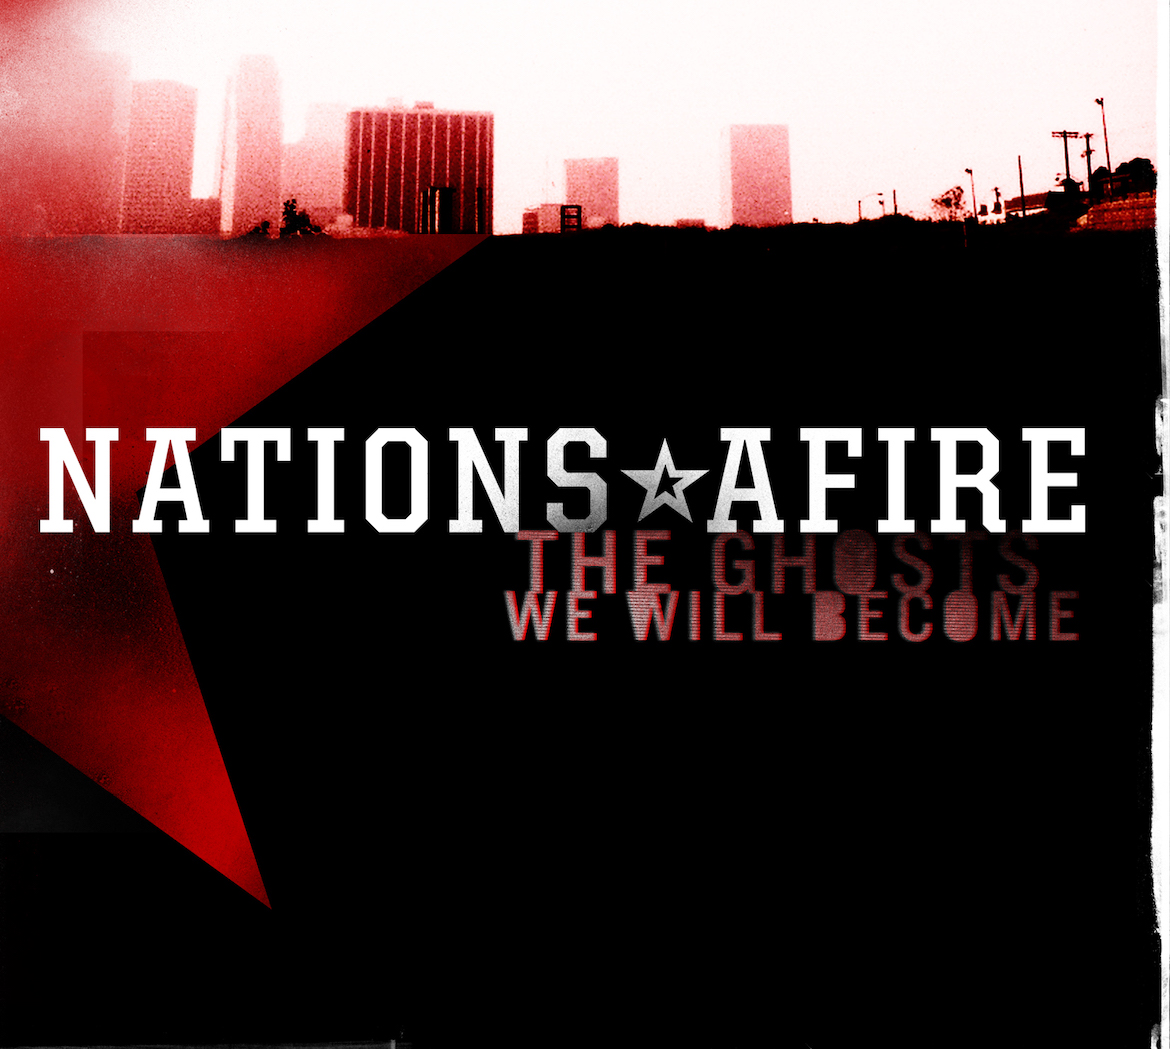 The Ghosts We Will Welcome Album Cover by Nations Afire